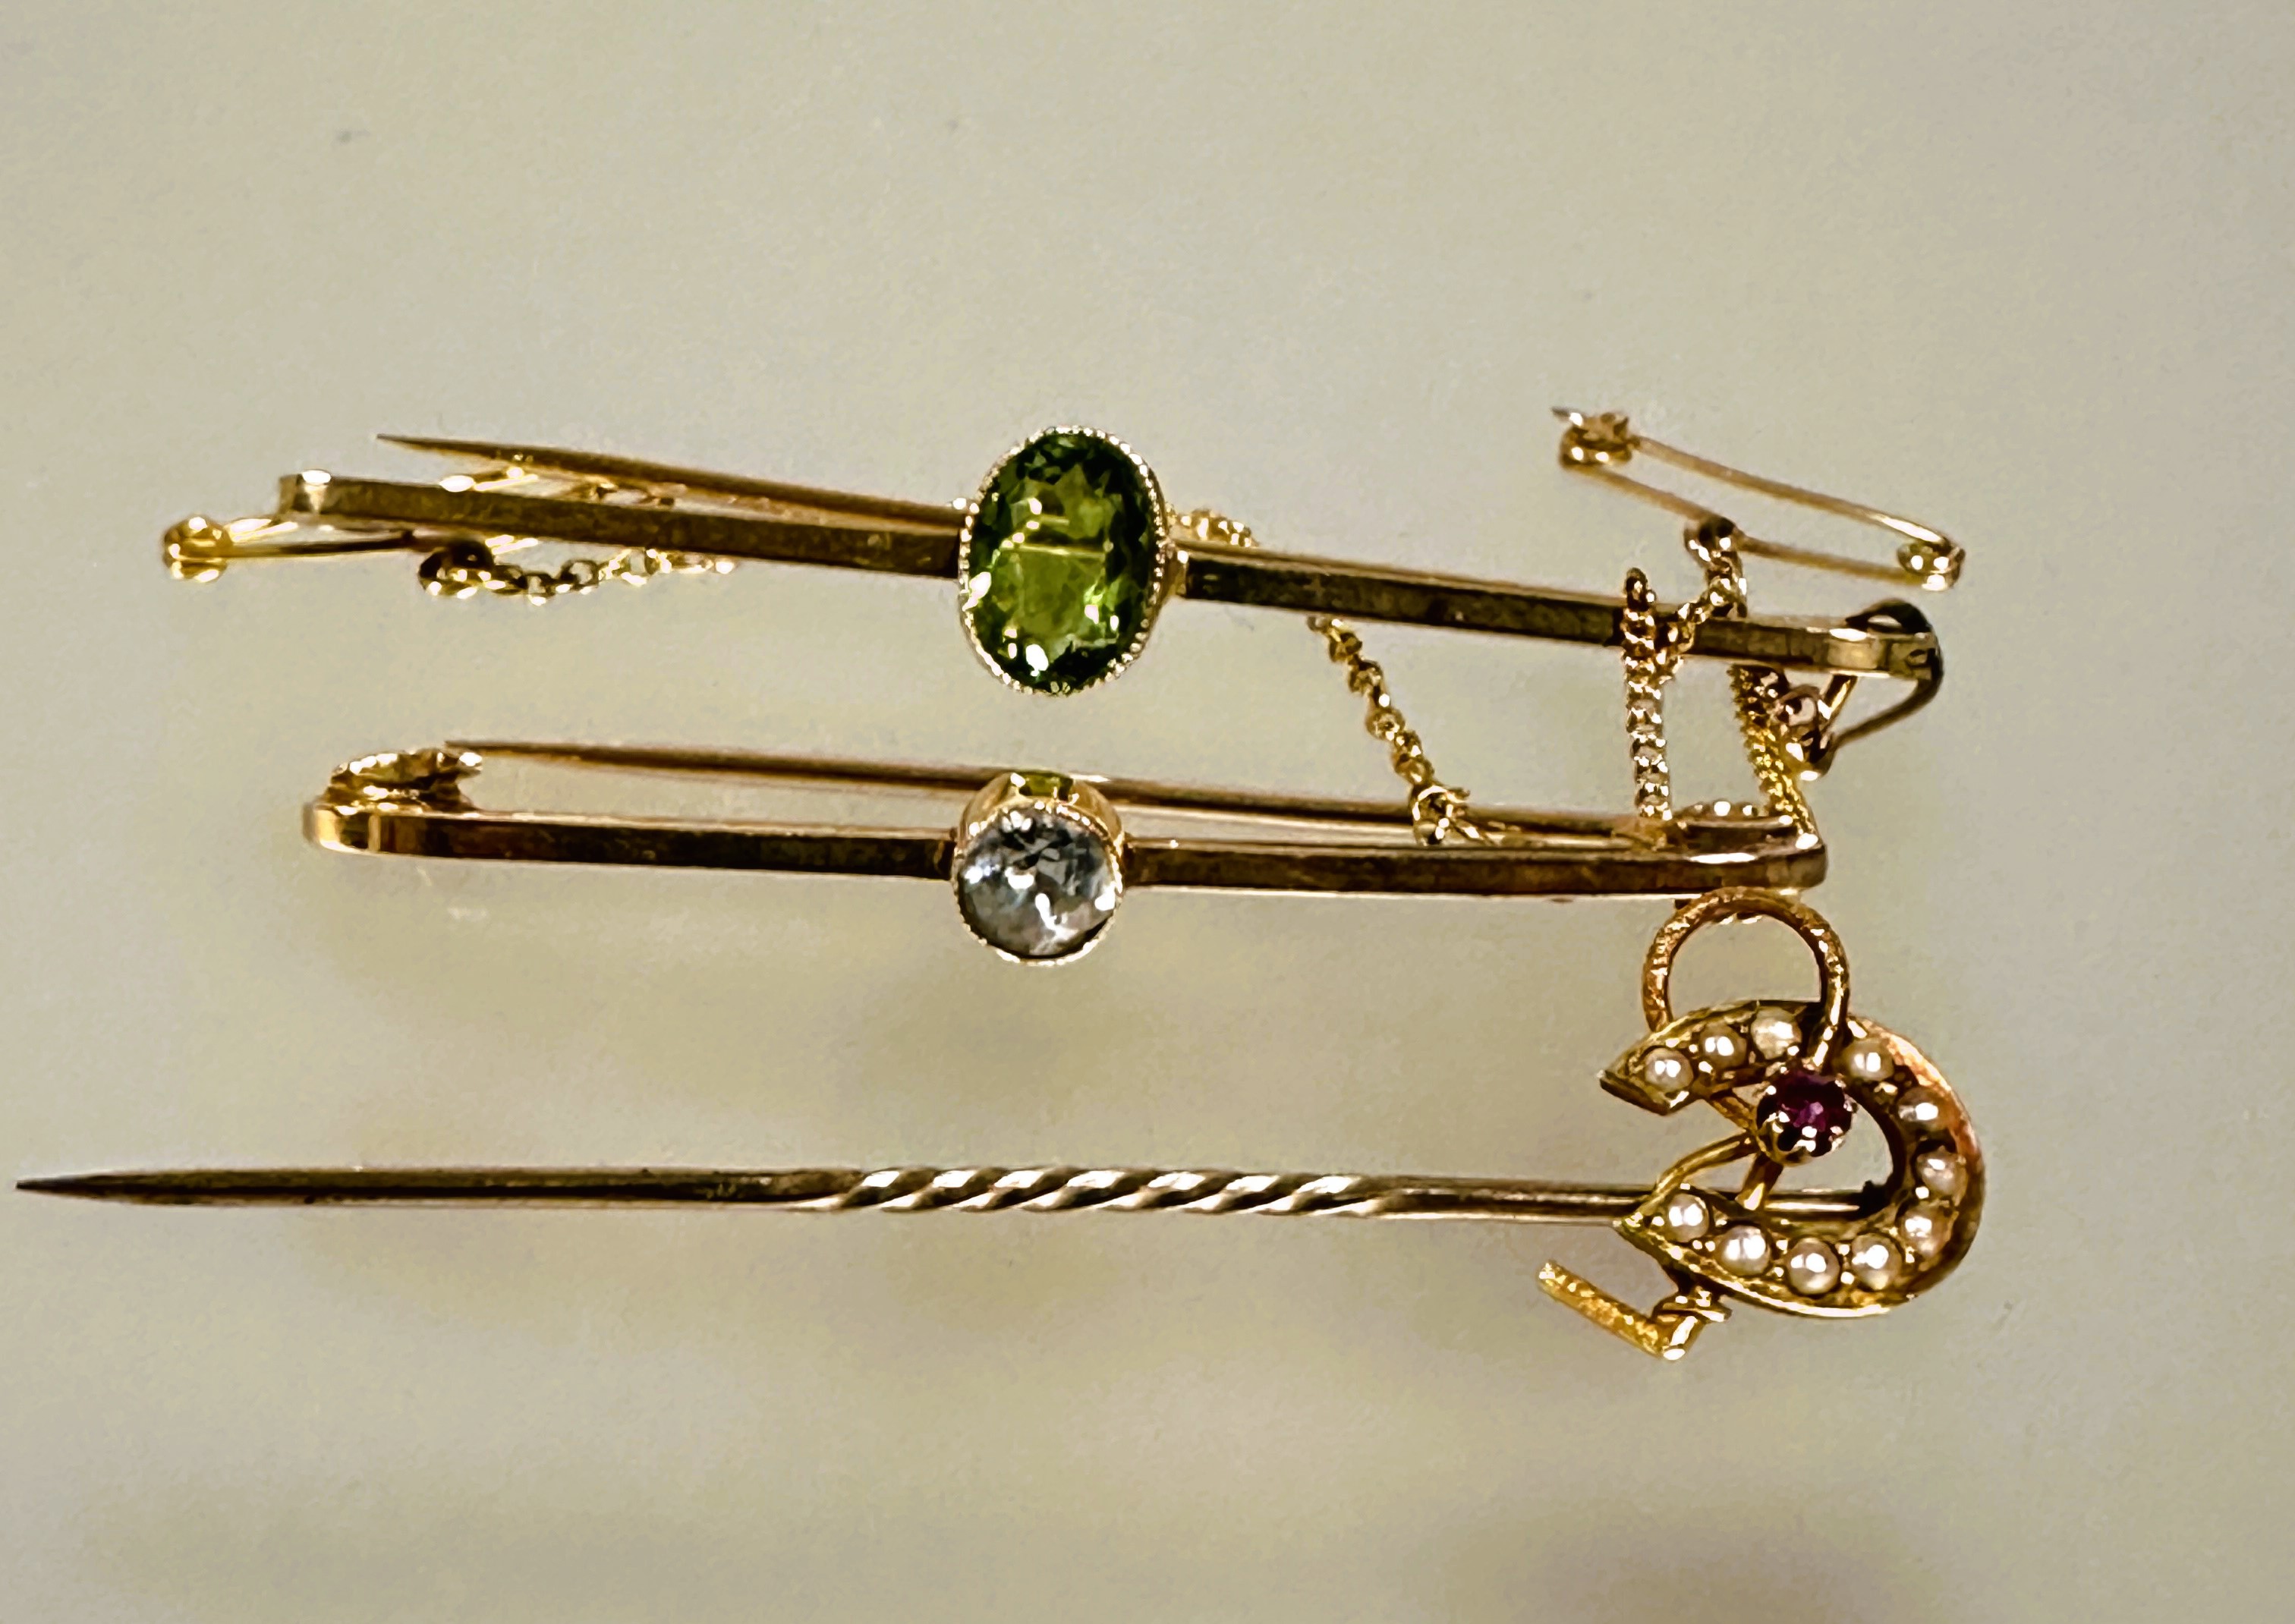 A 15ct gold Edwardian bar brooch set circular faceted aquamarine compete with safety chain L x 4.5cm - Image 2 of 4